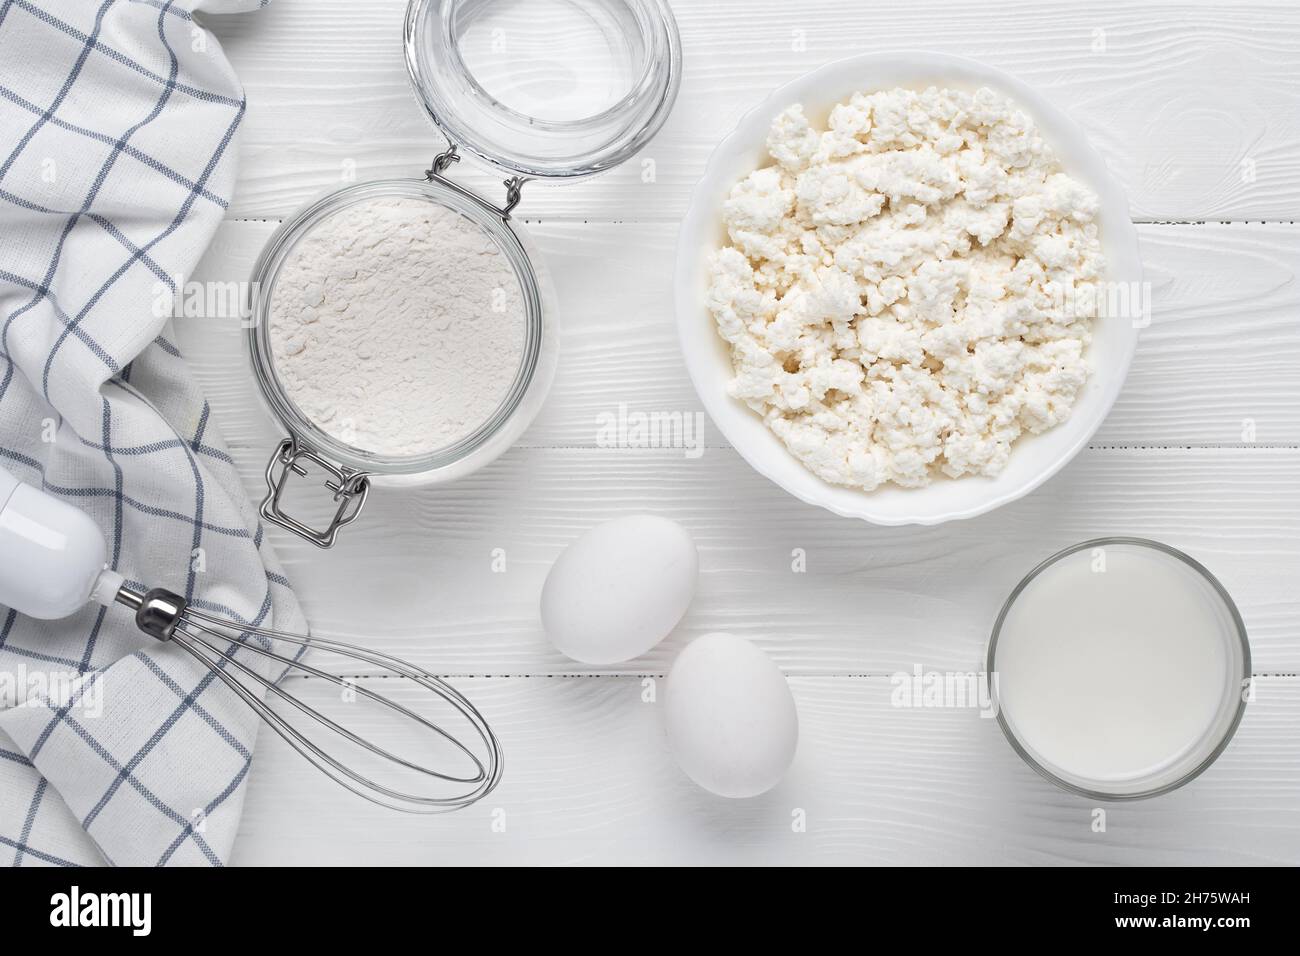 Raw curd cheese, flour, eggs, milk and whisk on a white wooden table. Cooking concept. Recipe ingredients. Baking products. View from above. Flat lay Stock Photo